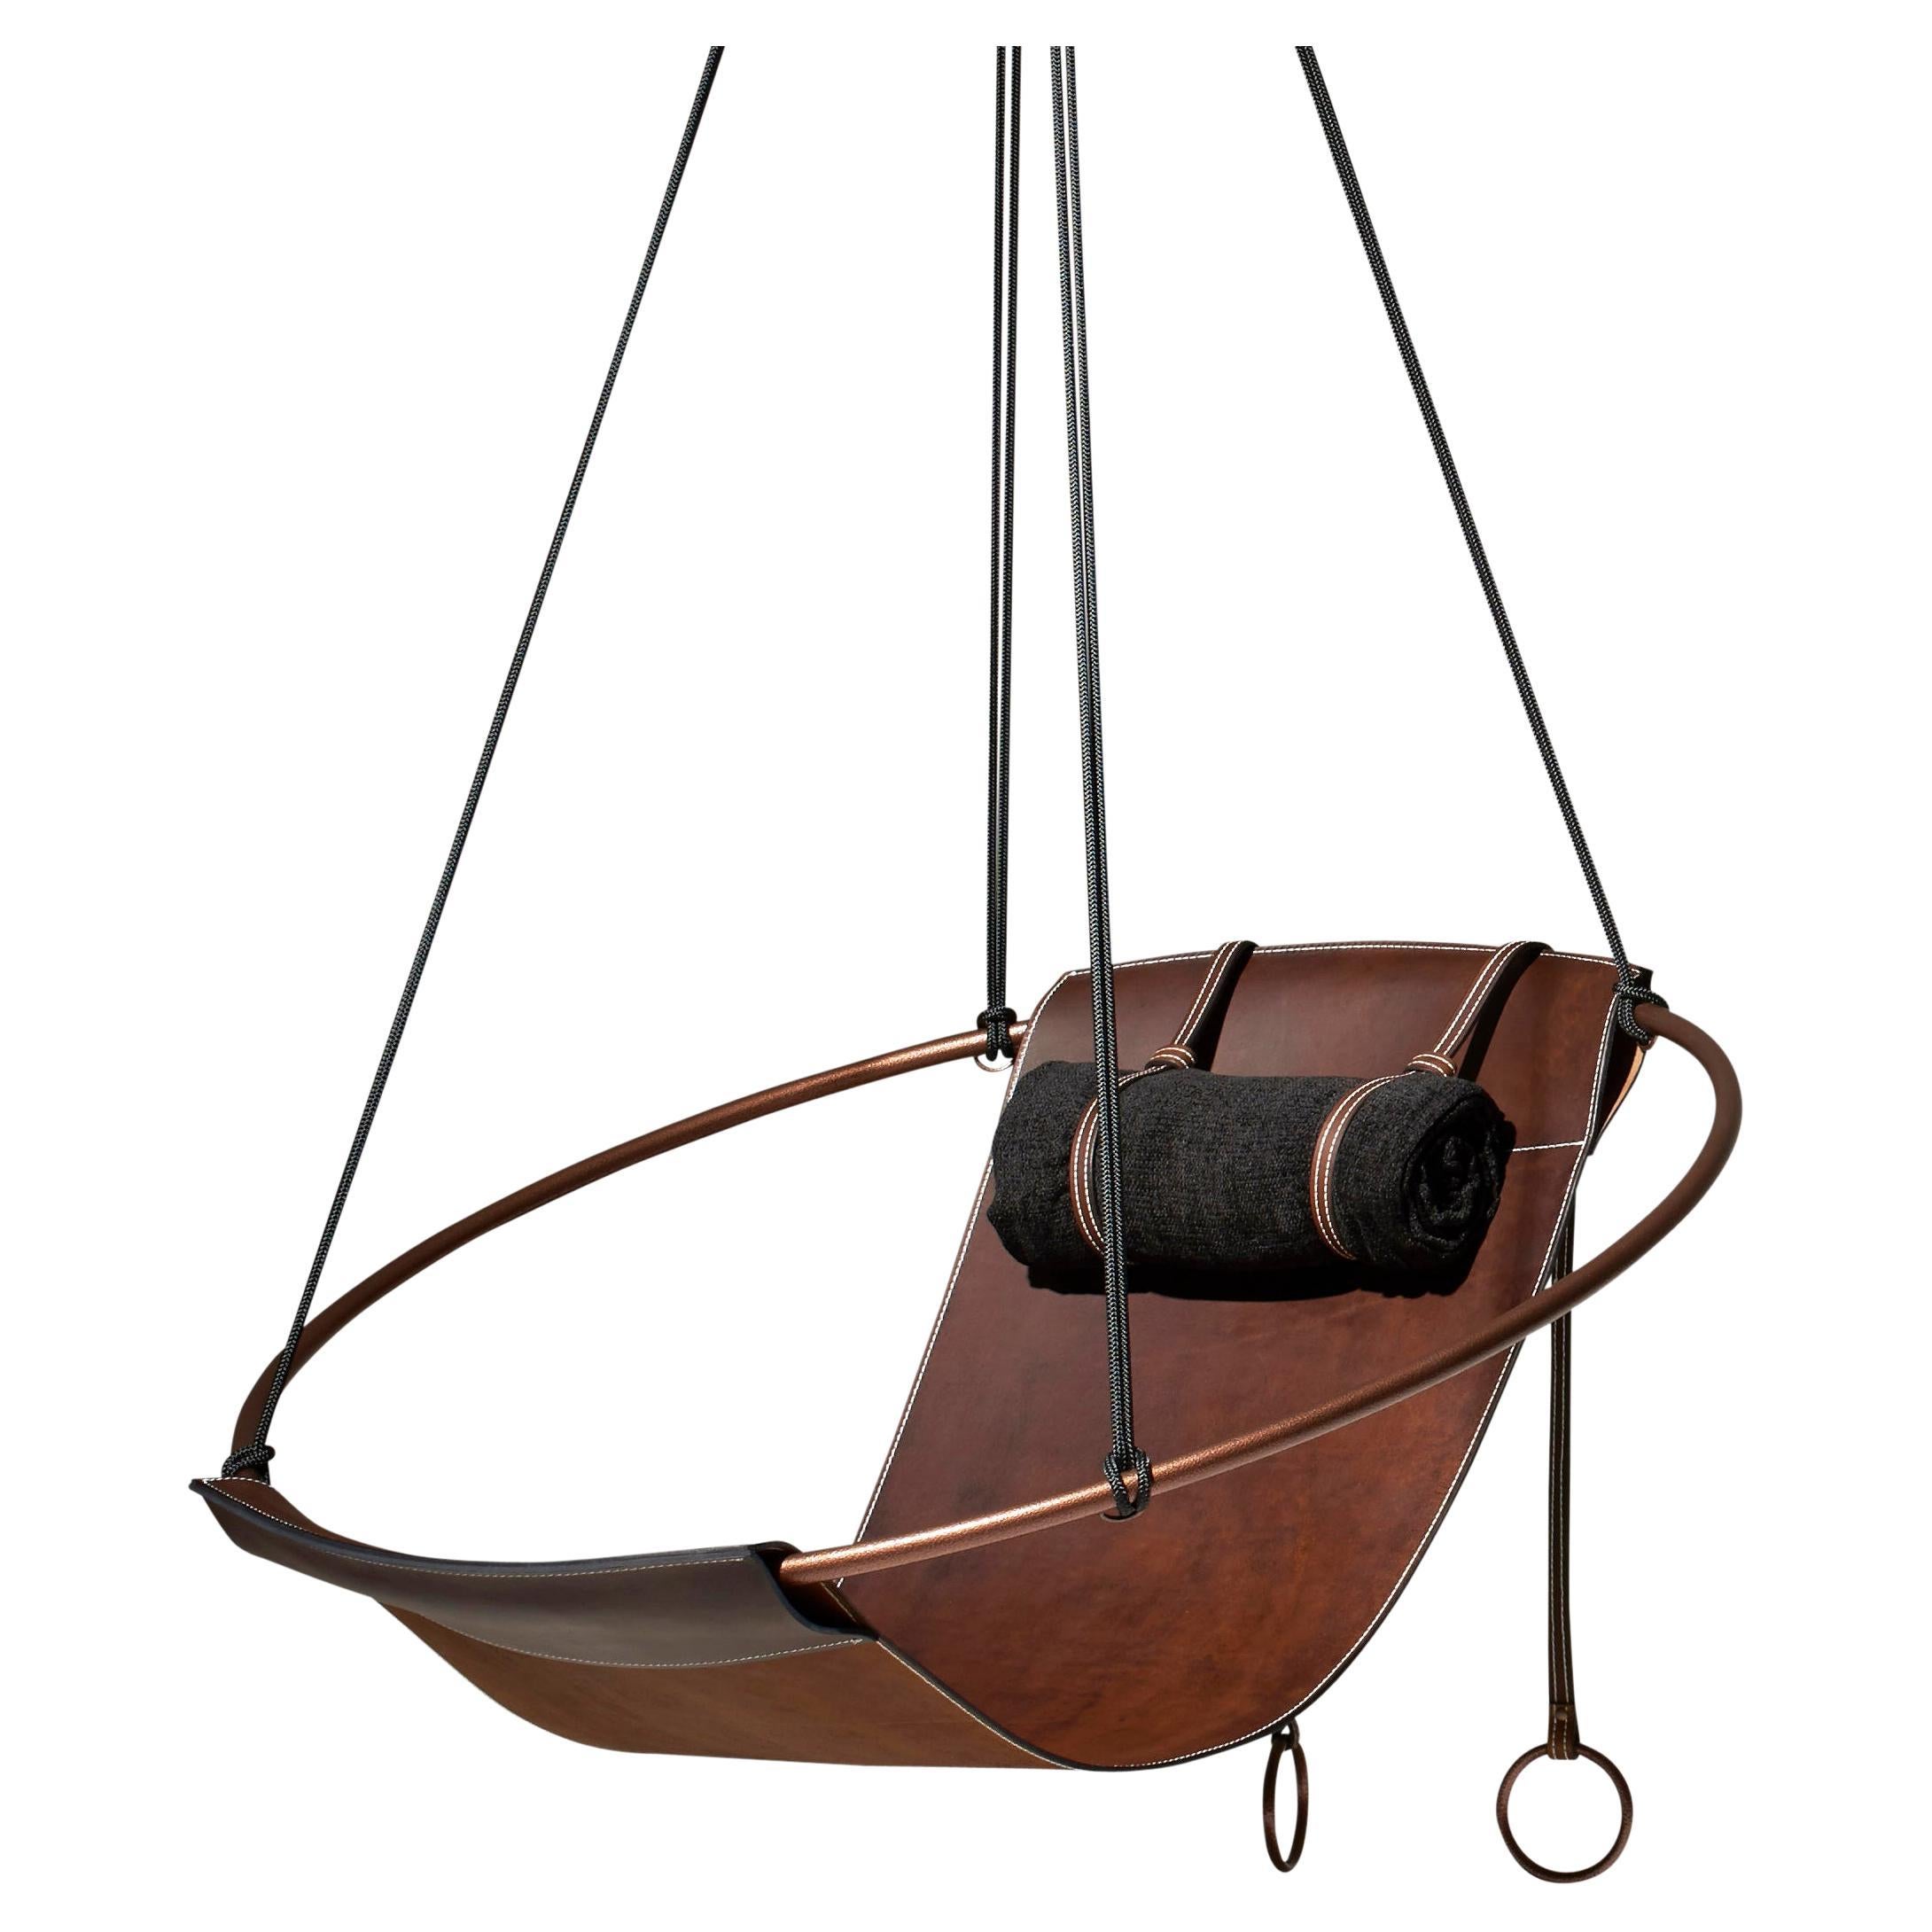 Modern Unique High Quality Thick Leather Sling Hanging Swing